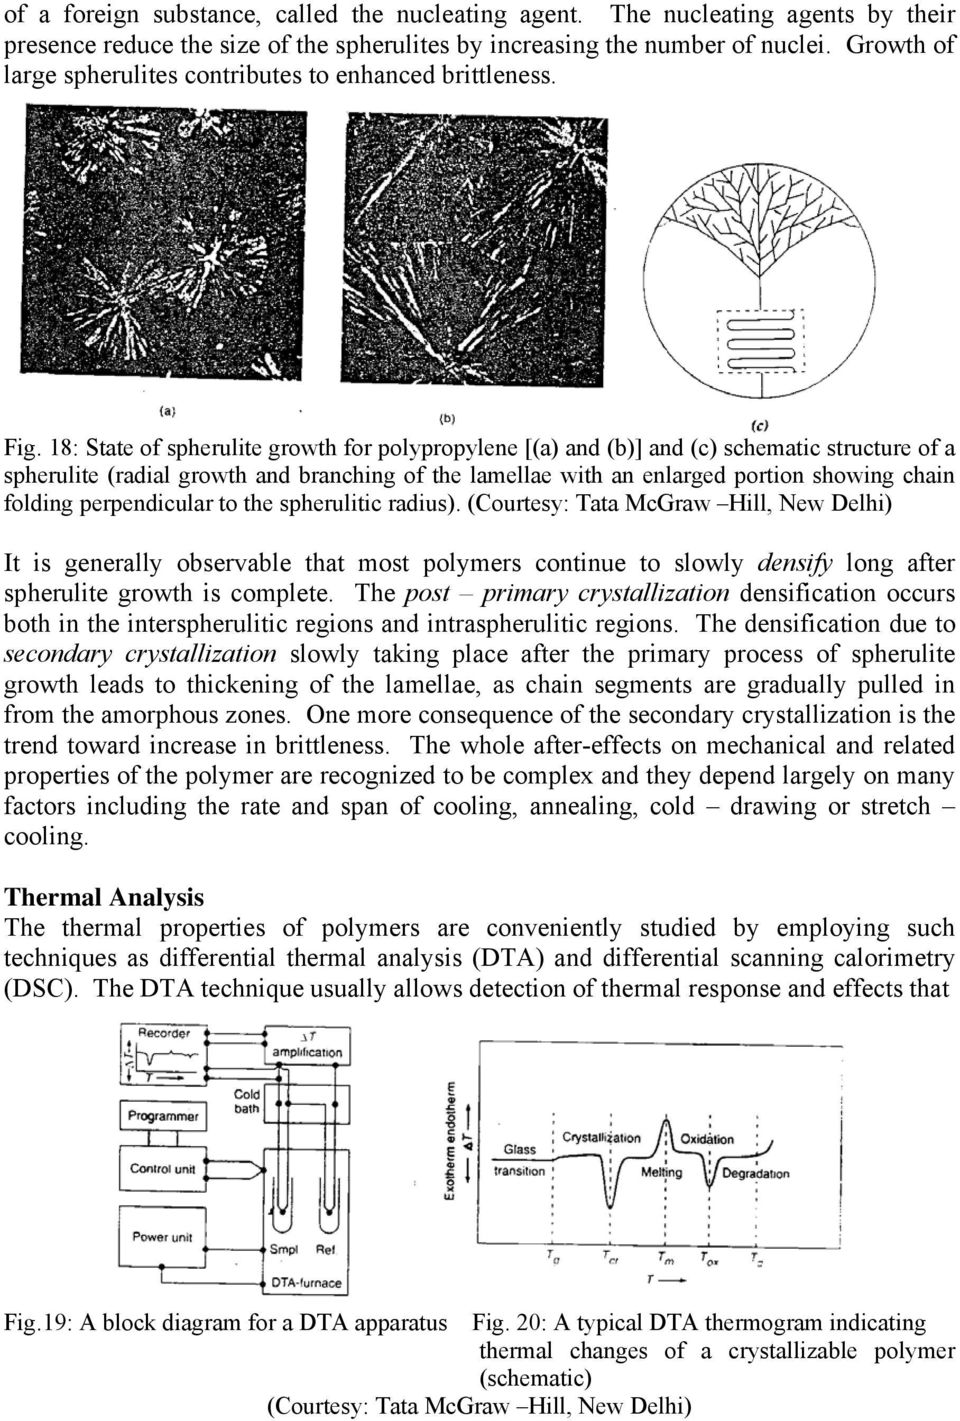 18: State of spherulite growth for polypropylene [(a) and (b)] and (c) schematic structure of a spherulite (radial growth and branching of the lamellae with an enlarged portion showing chain folding